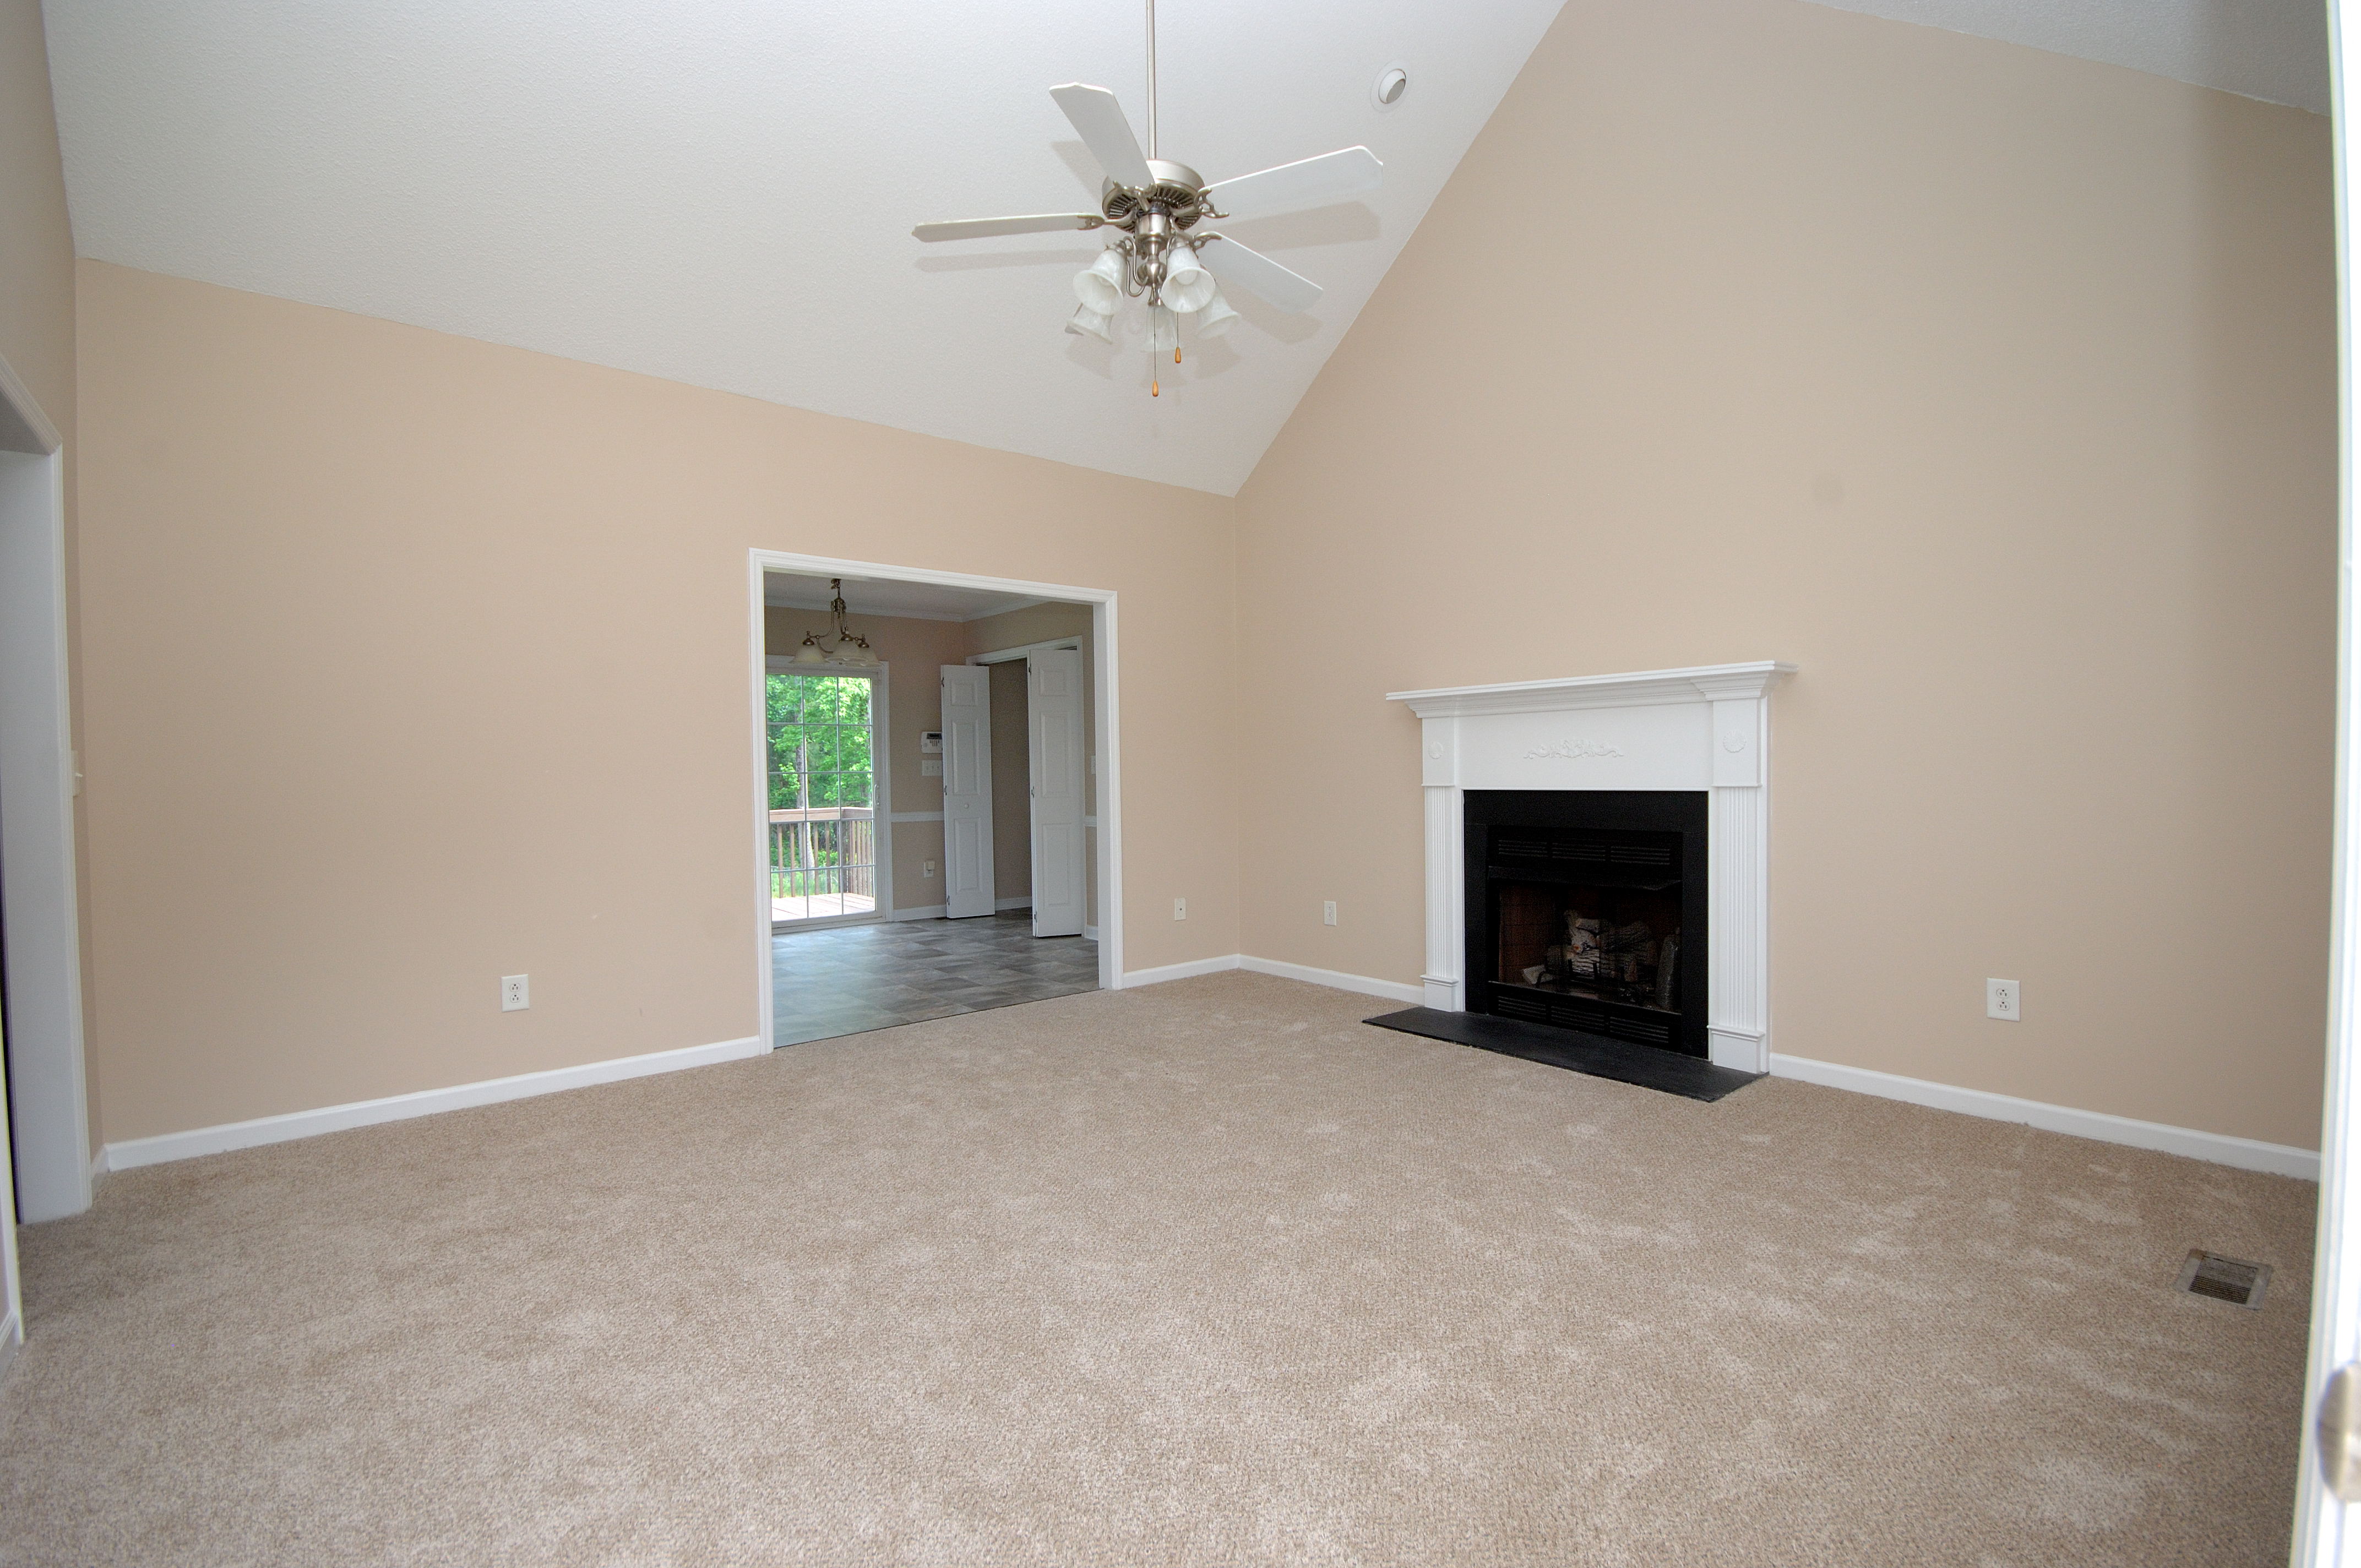 Goldsboro NC - Homes for Rent - 220 Koufax Drive Pikeville NC 27863 - Living Room